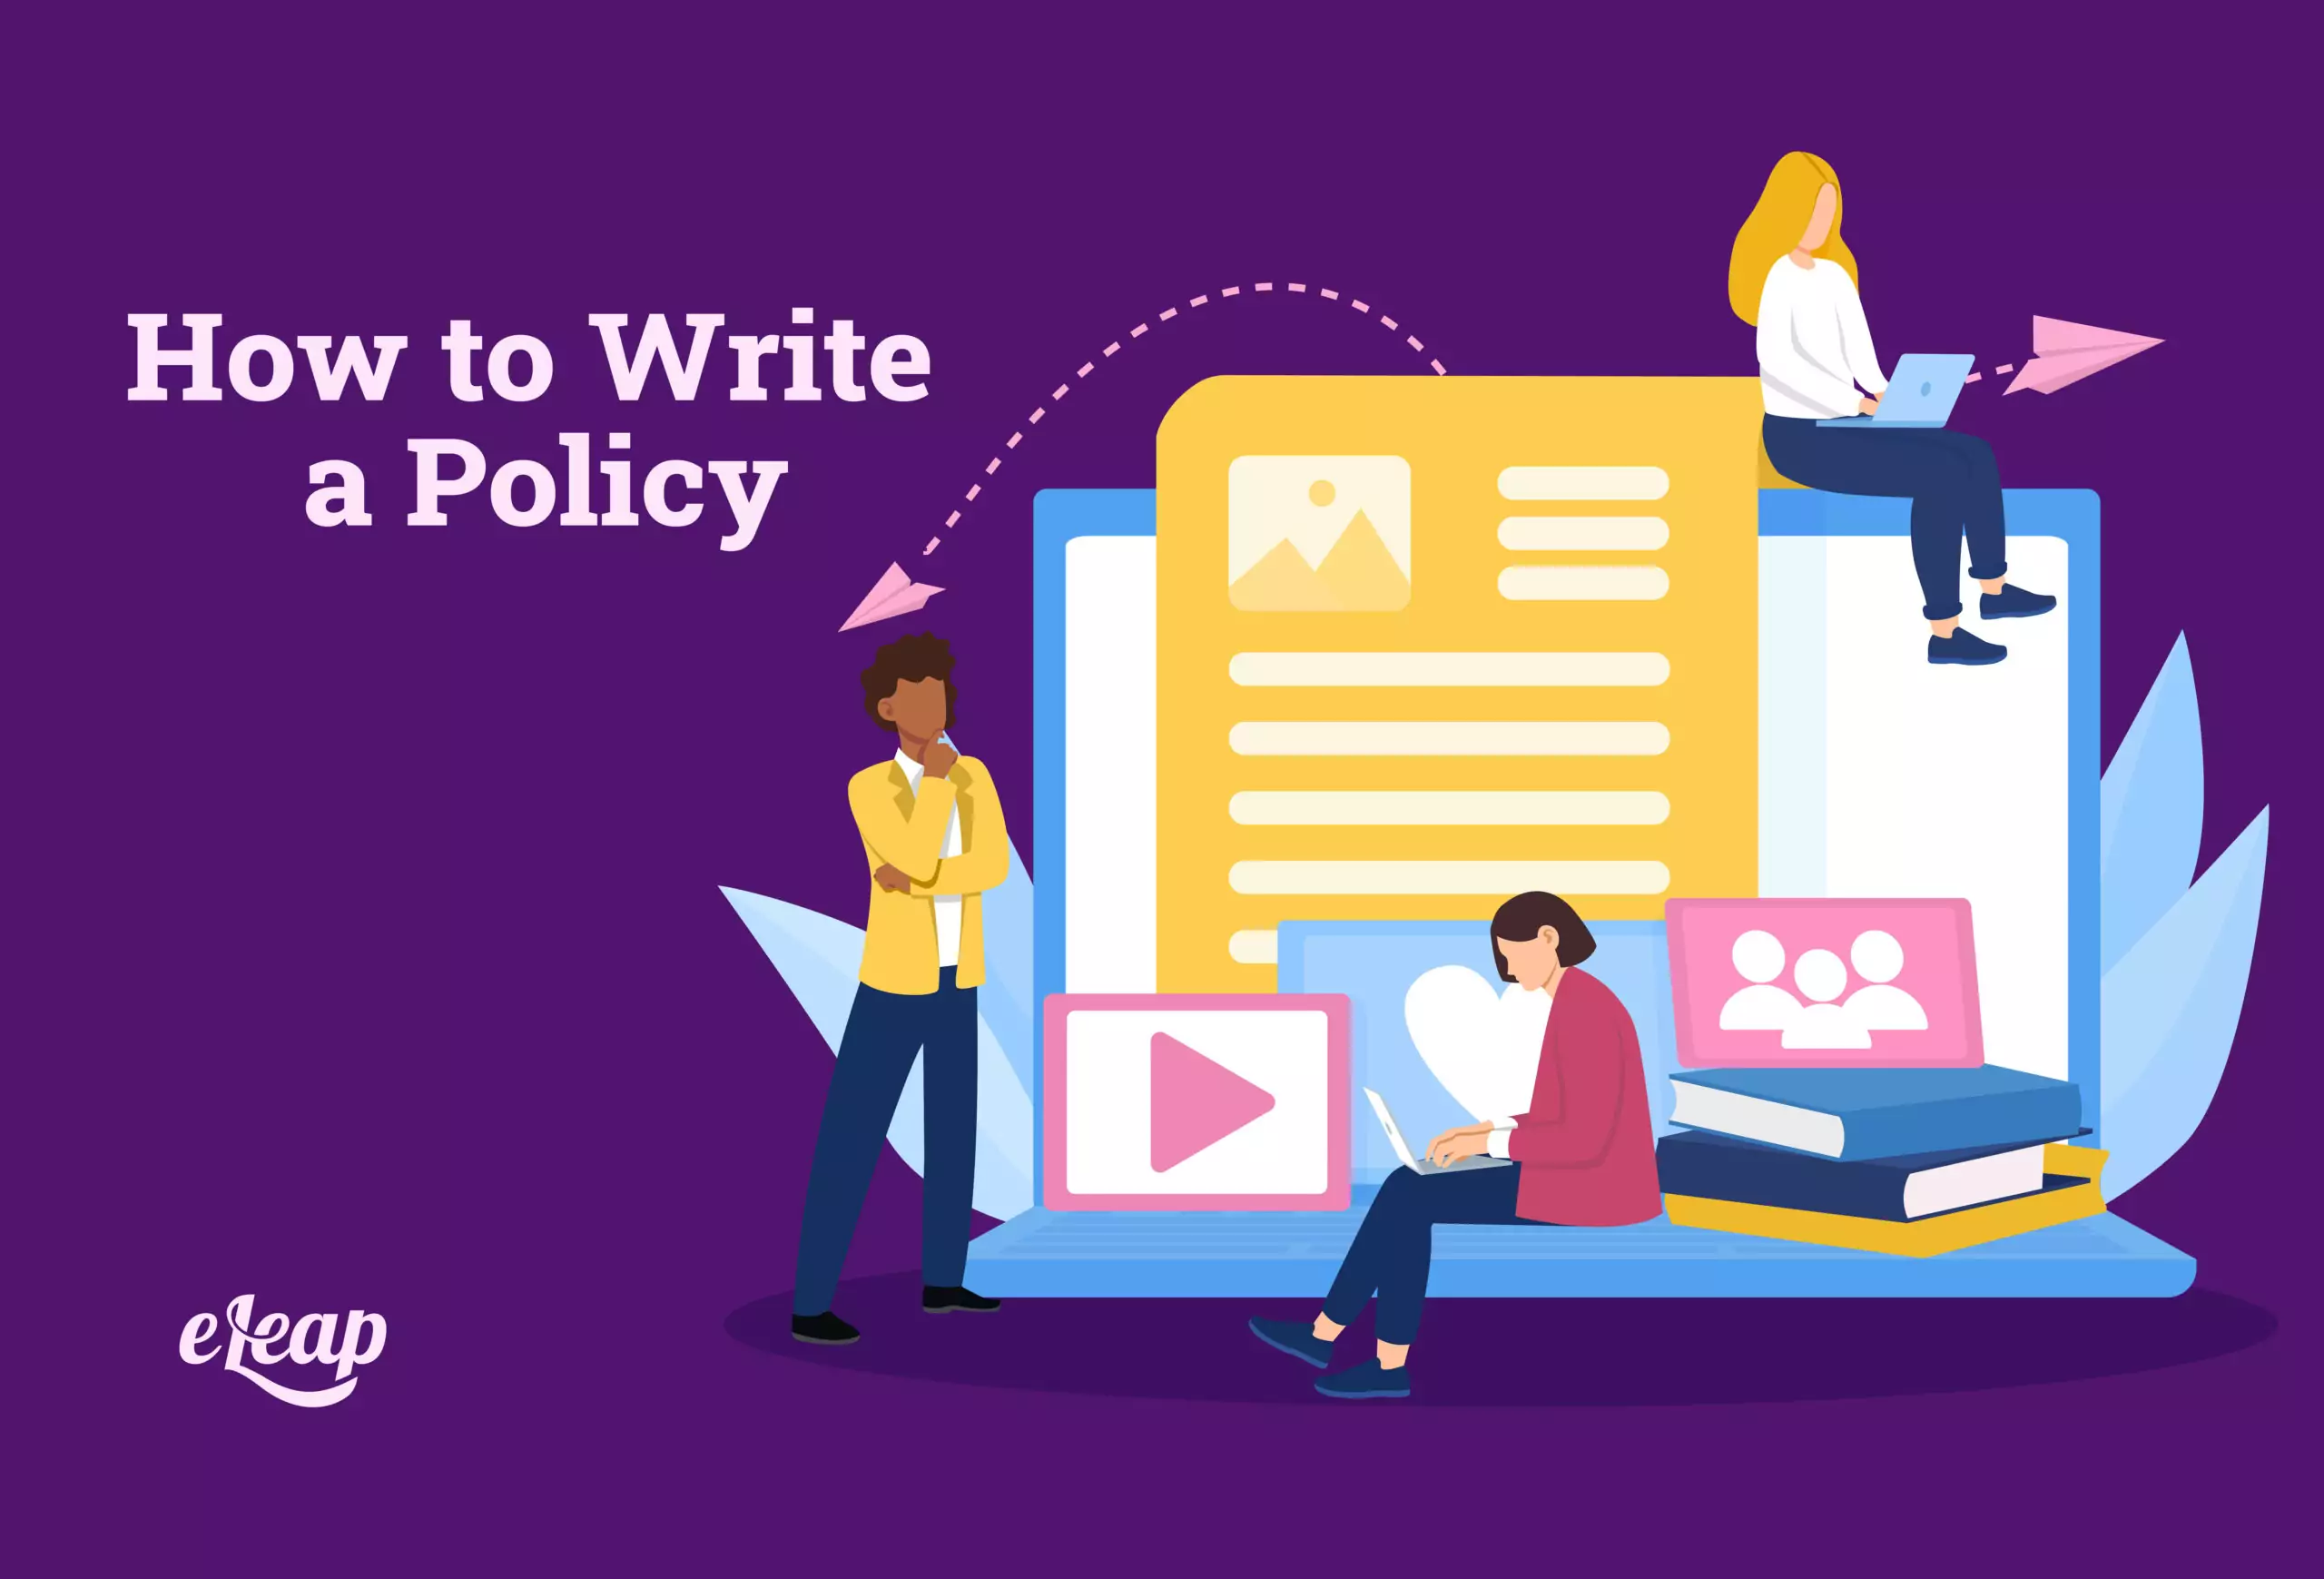 How to Write a Policy